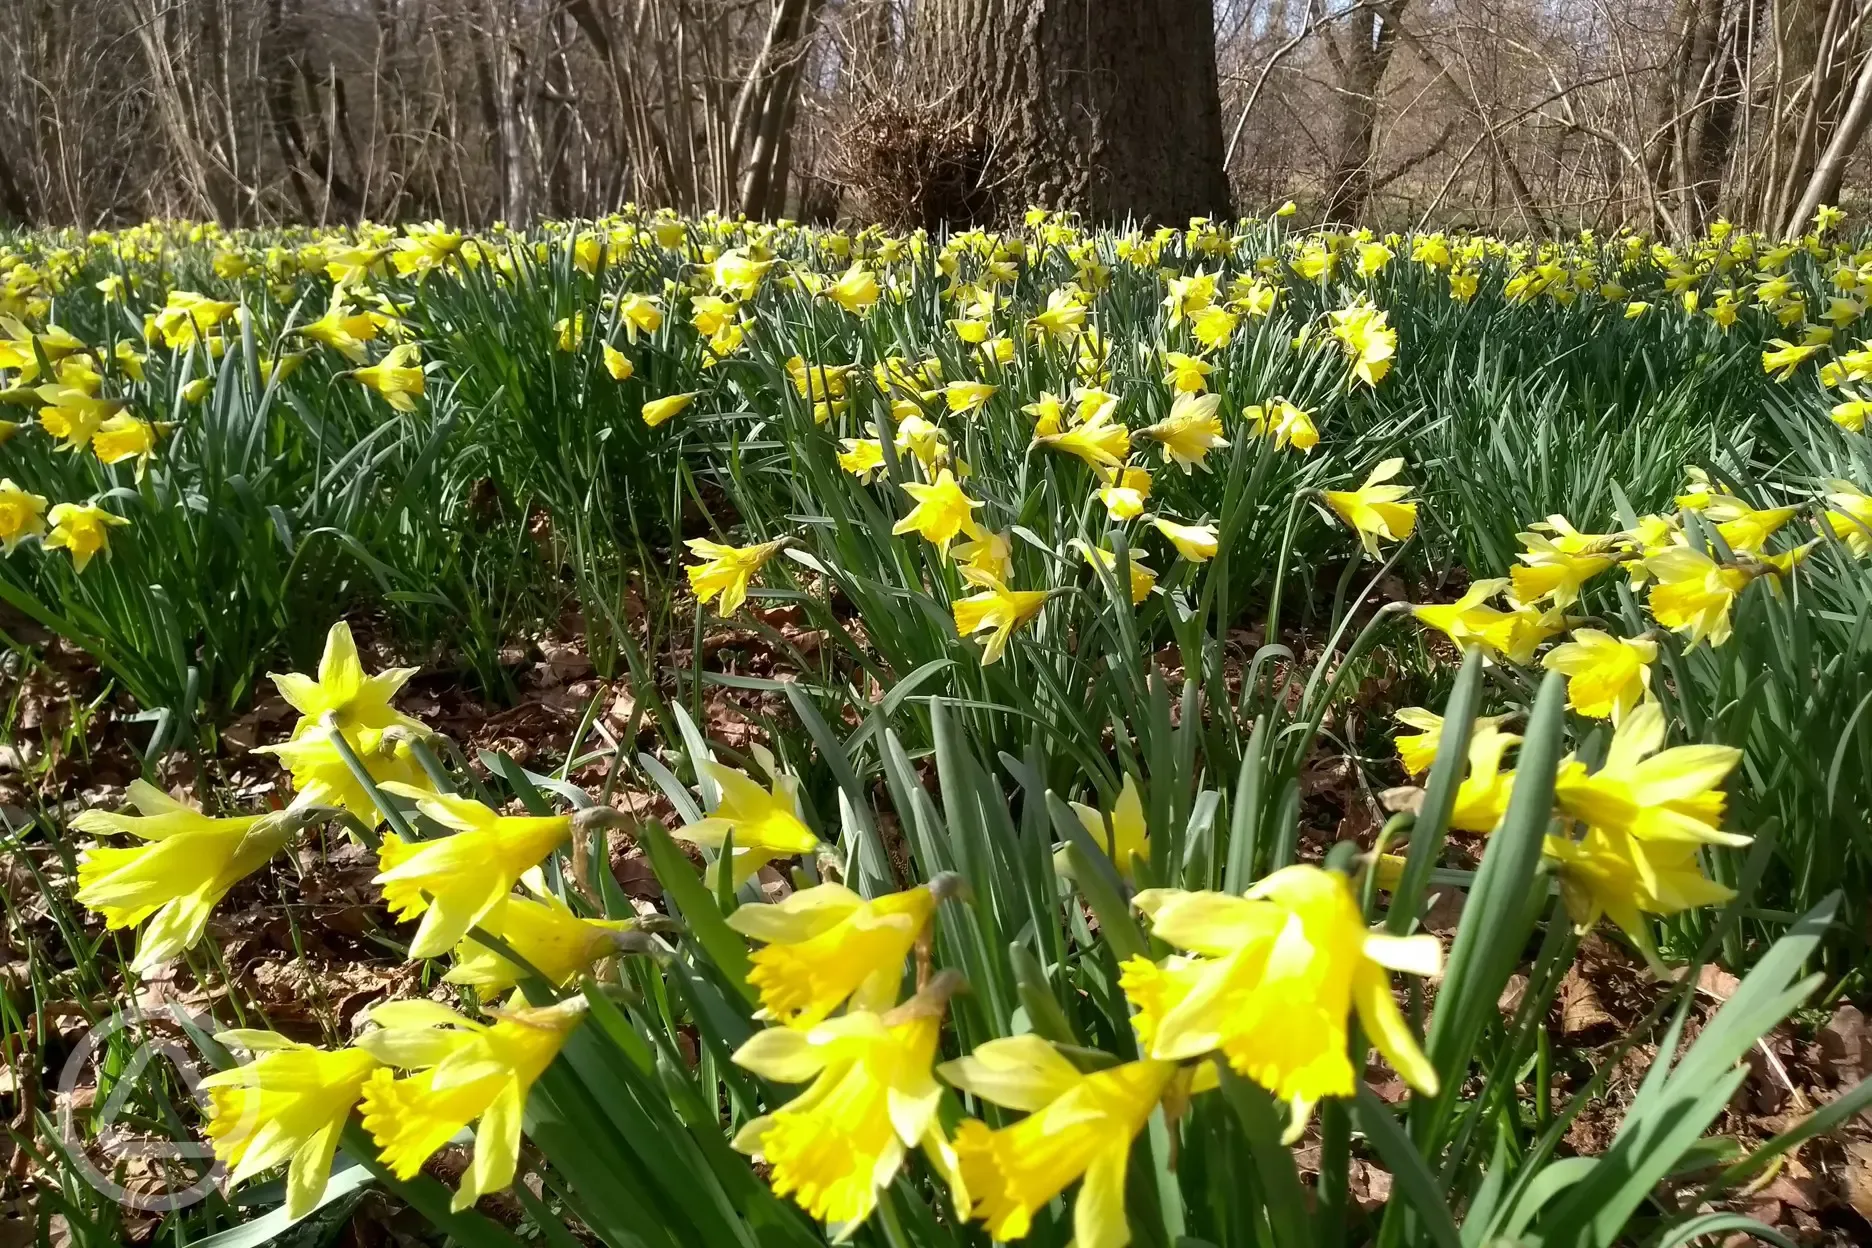 Daffodils in the woods